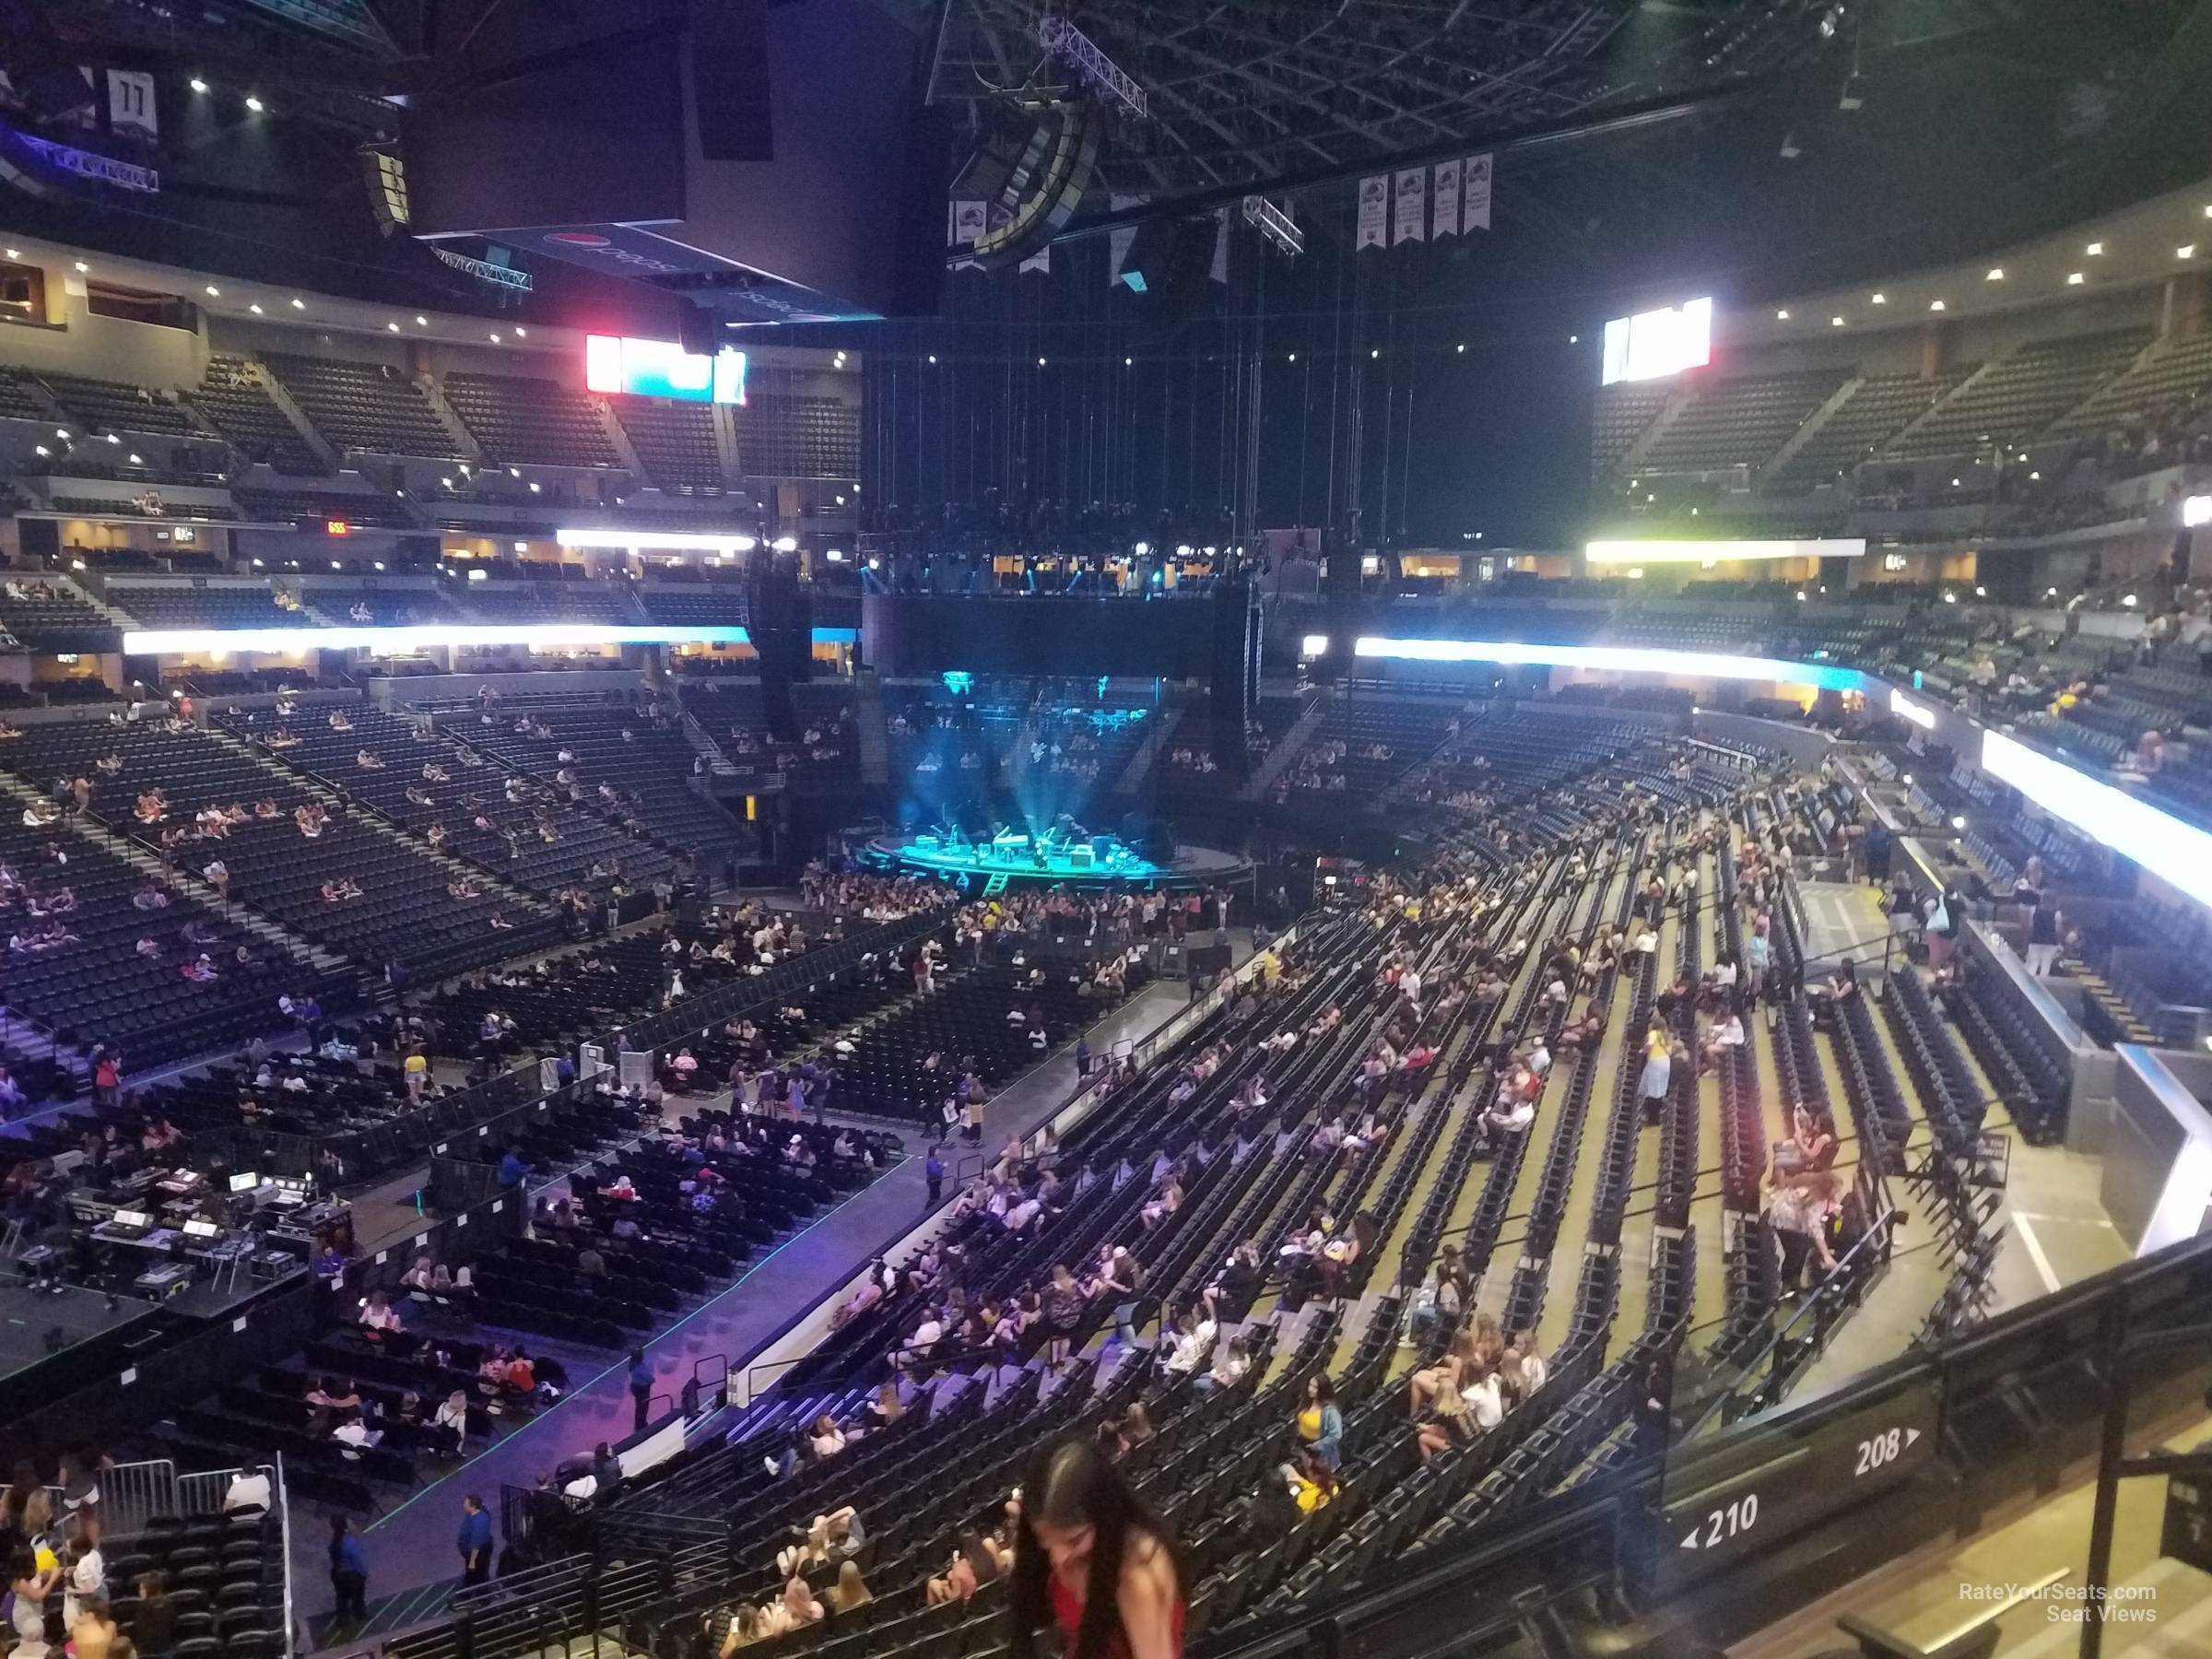 section 210, row 4 seat view  for concert - ball arena